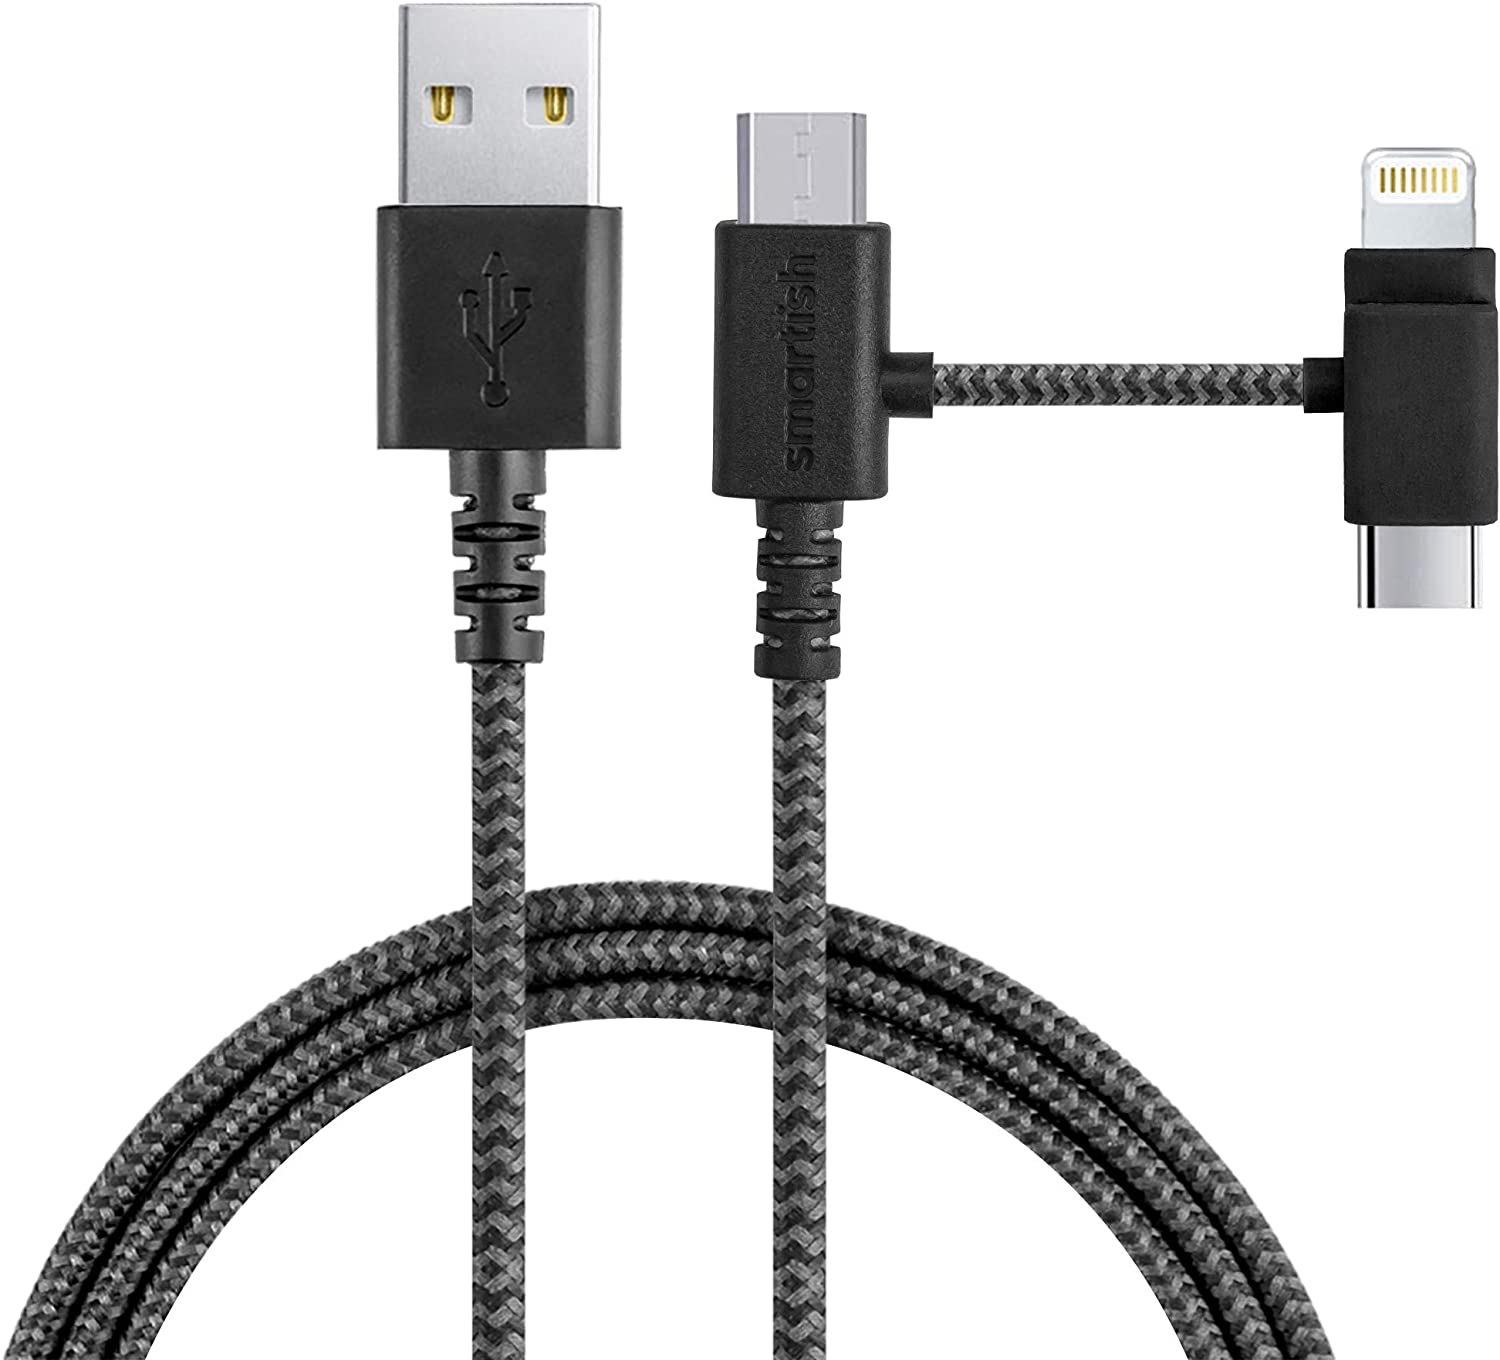 Smartish 3-in-1 Universal Fast Fabric Wrapped 6ft Charging Cable - Crown Joule [Micro USB w/Lightning & USB-C Adapters] Apple MFi Certified for iPhone/iPad/Airpods & Android Phones - No.2 Pencil Gray - image 1 of 5